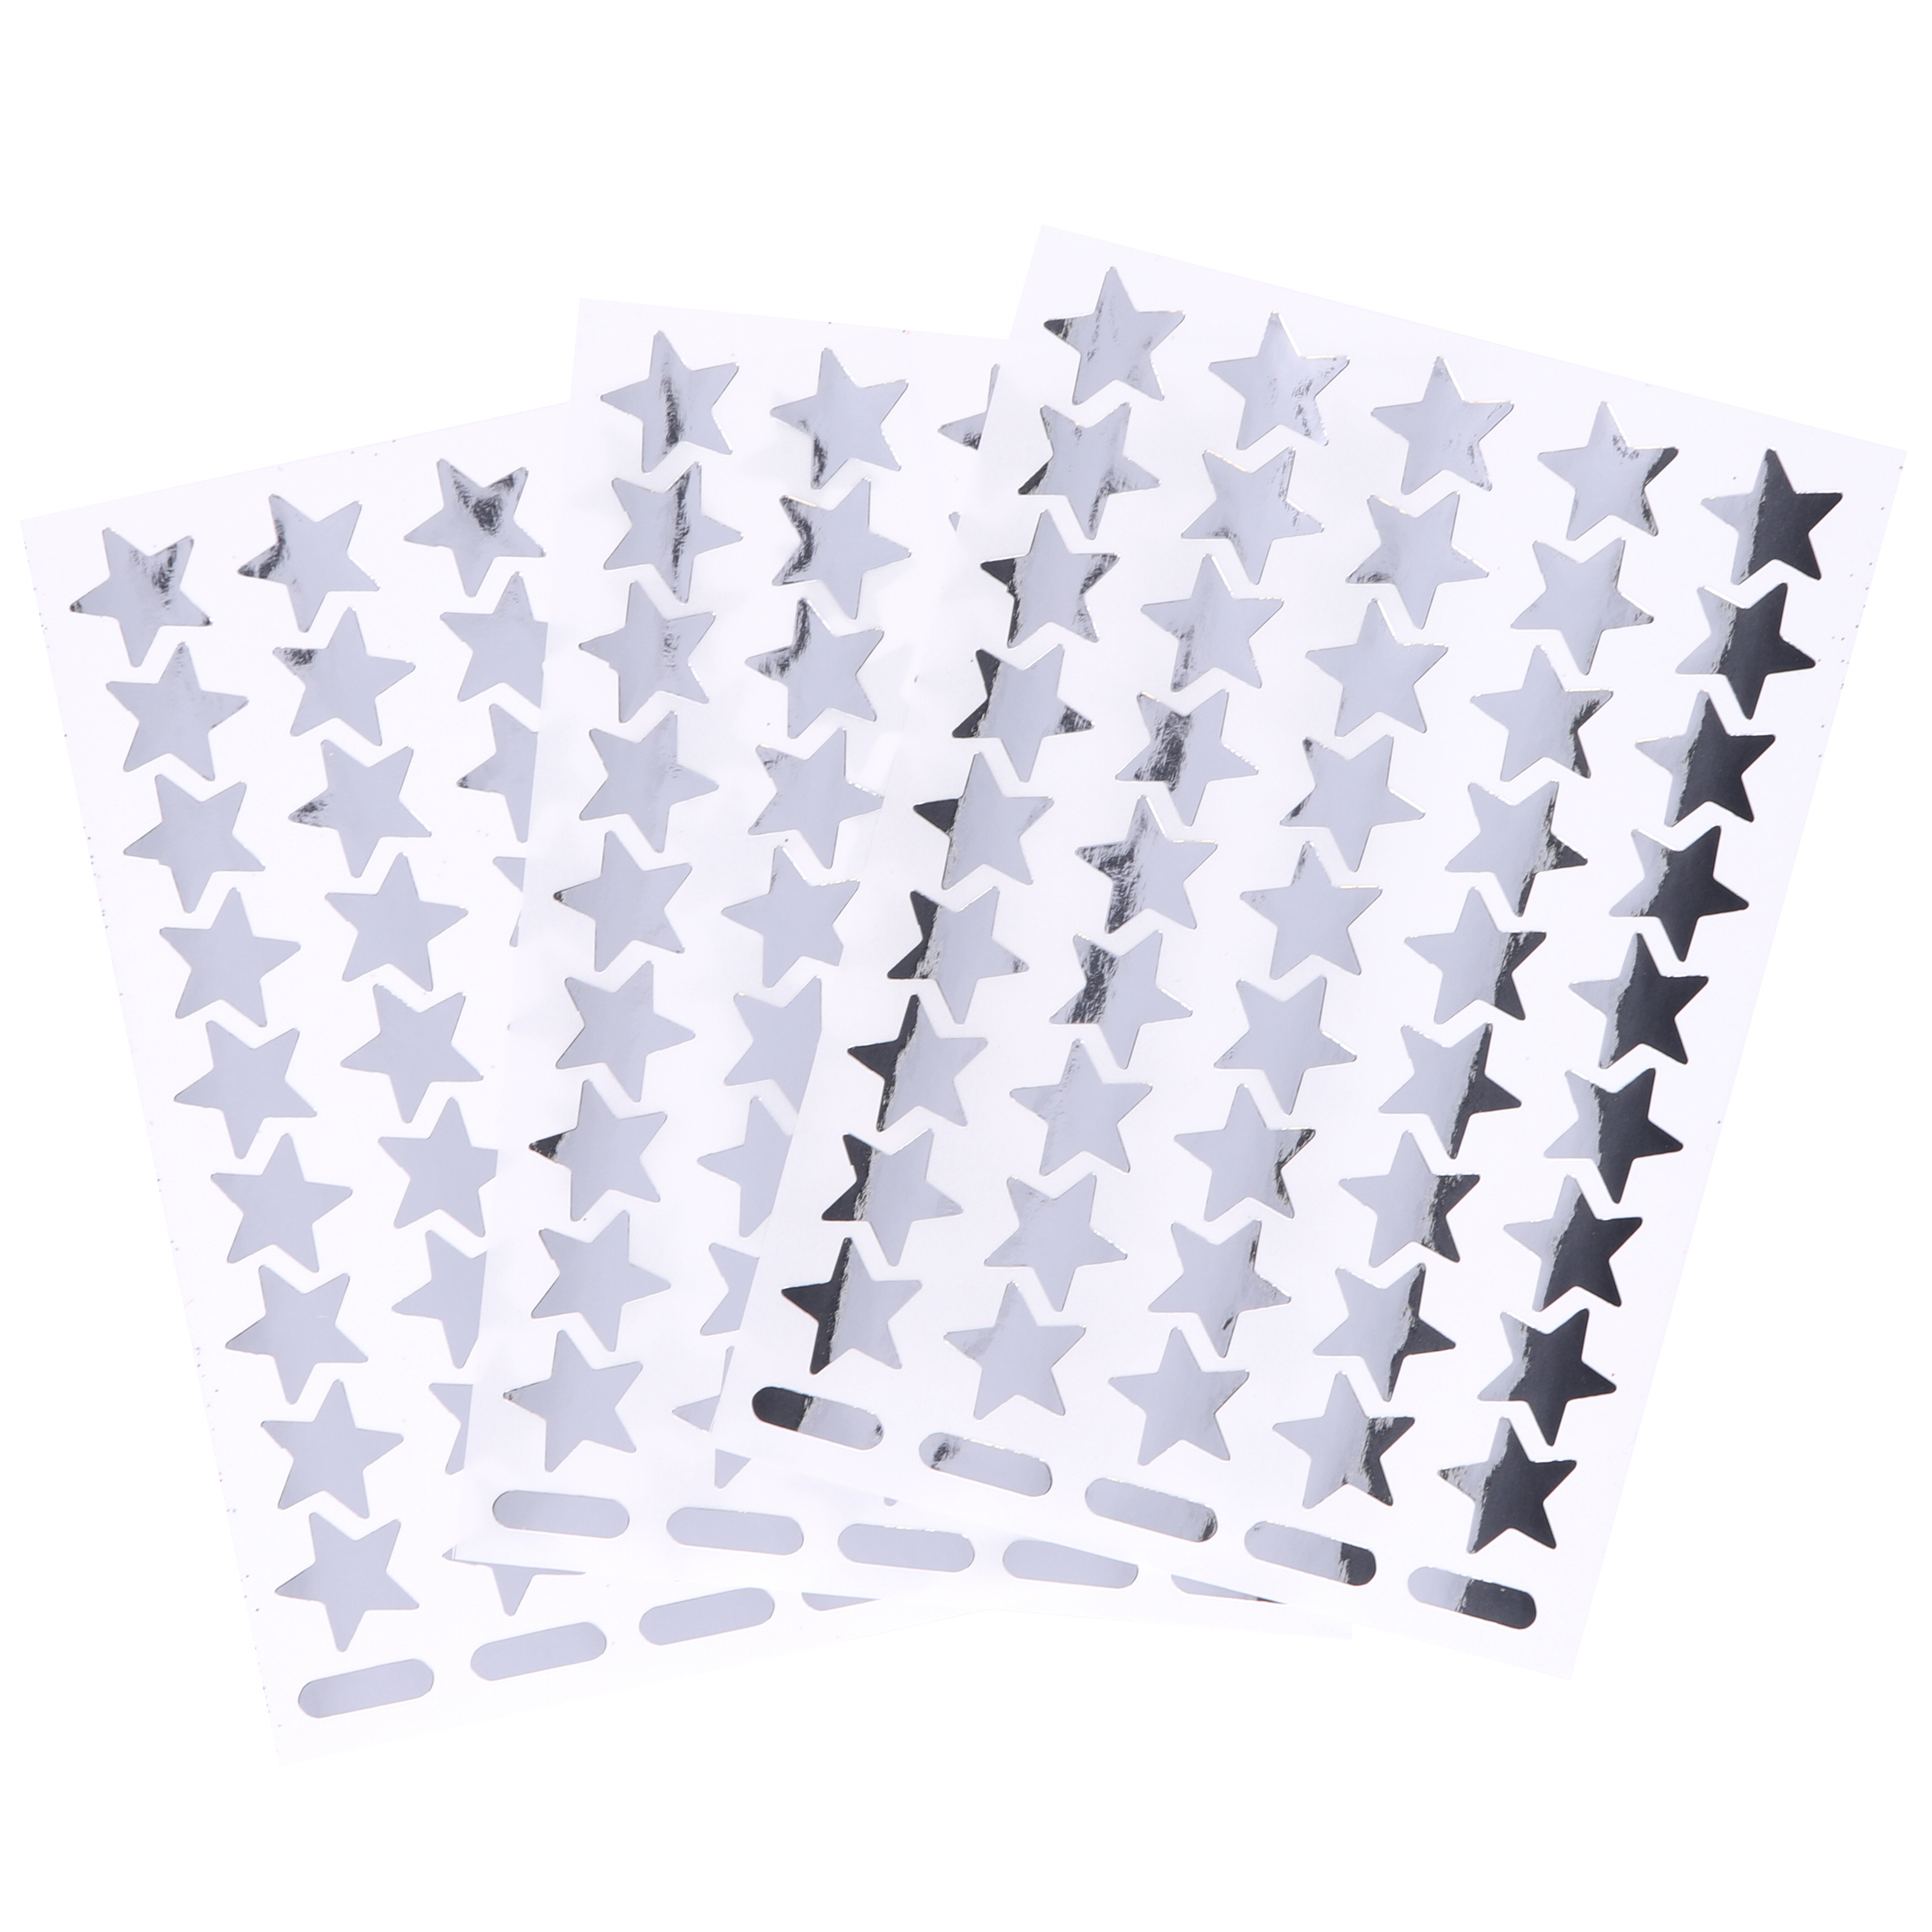 G1778903 - Classmates Value Star Stickers - Silver - Pack of 135